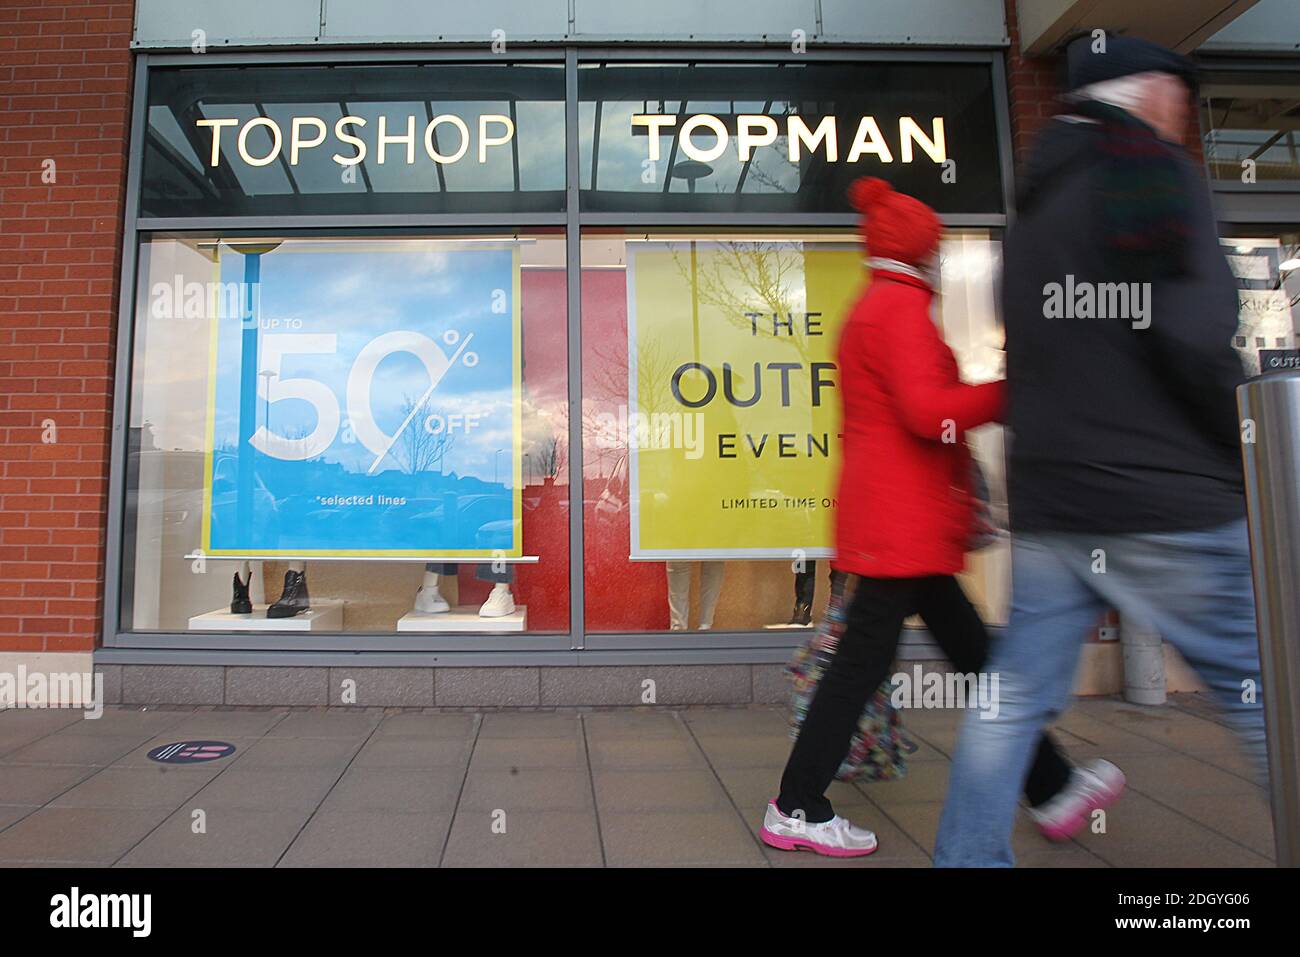 Topshop and Topman at the Outfit store on Parc Llandudno, The umbrella  company Arcadia has gone into administration and it's believed the chain  will stop trading in the spring with around 12,000